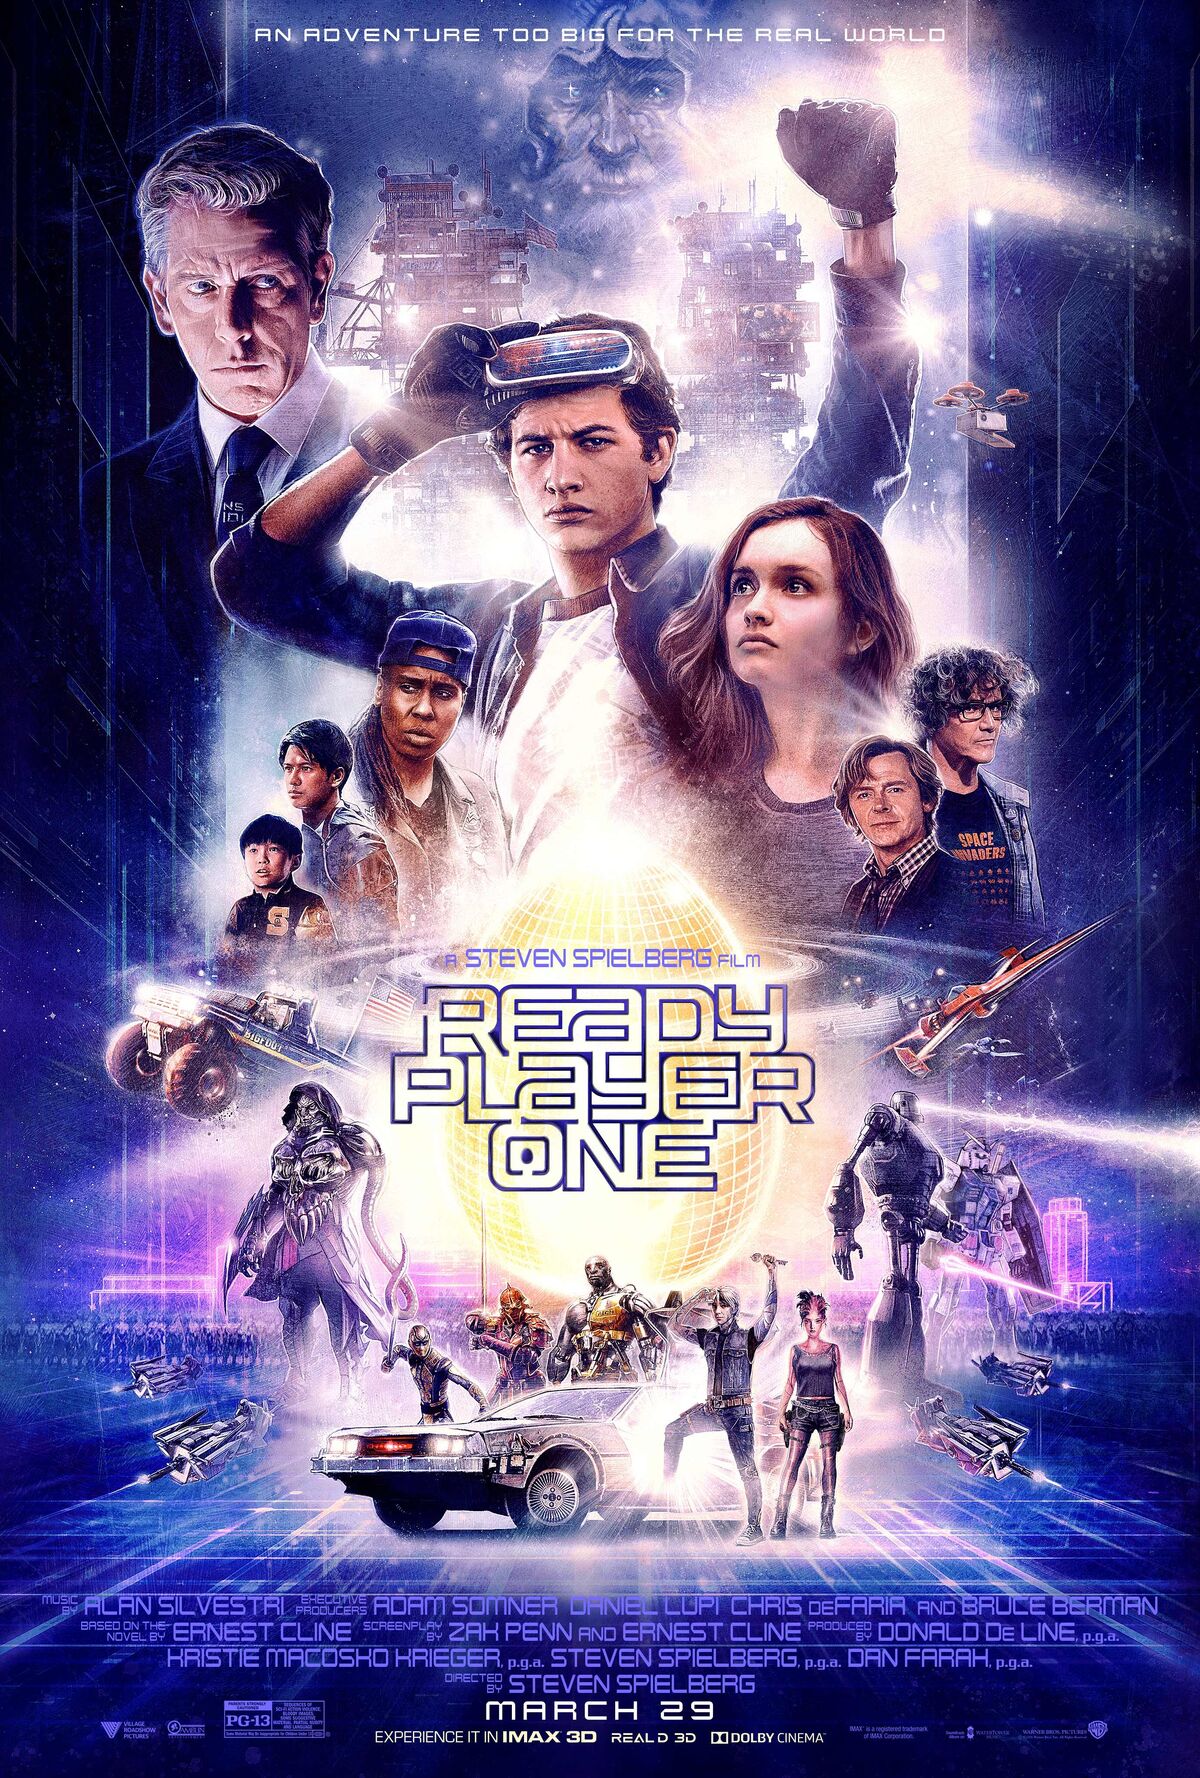 Review: Spielberg toasts greats in 'Ready Player One